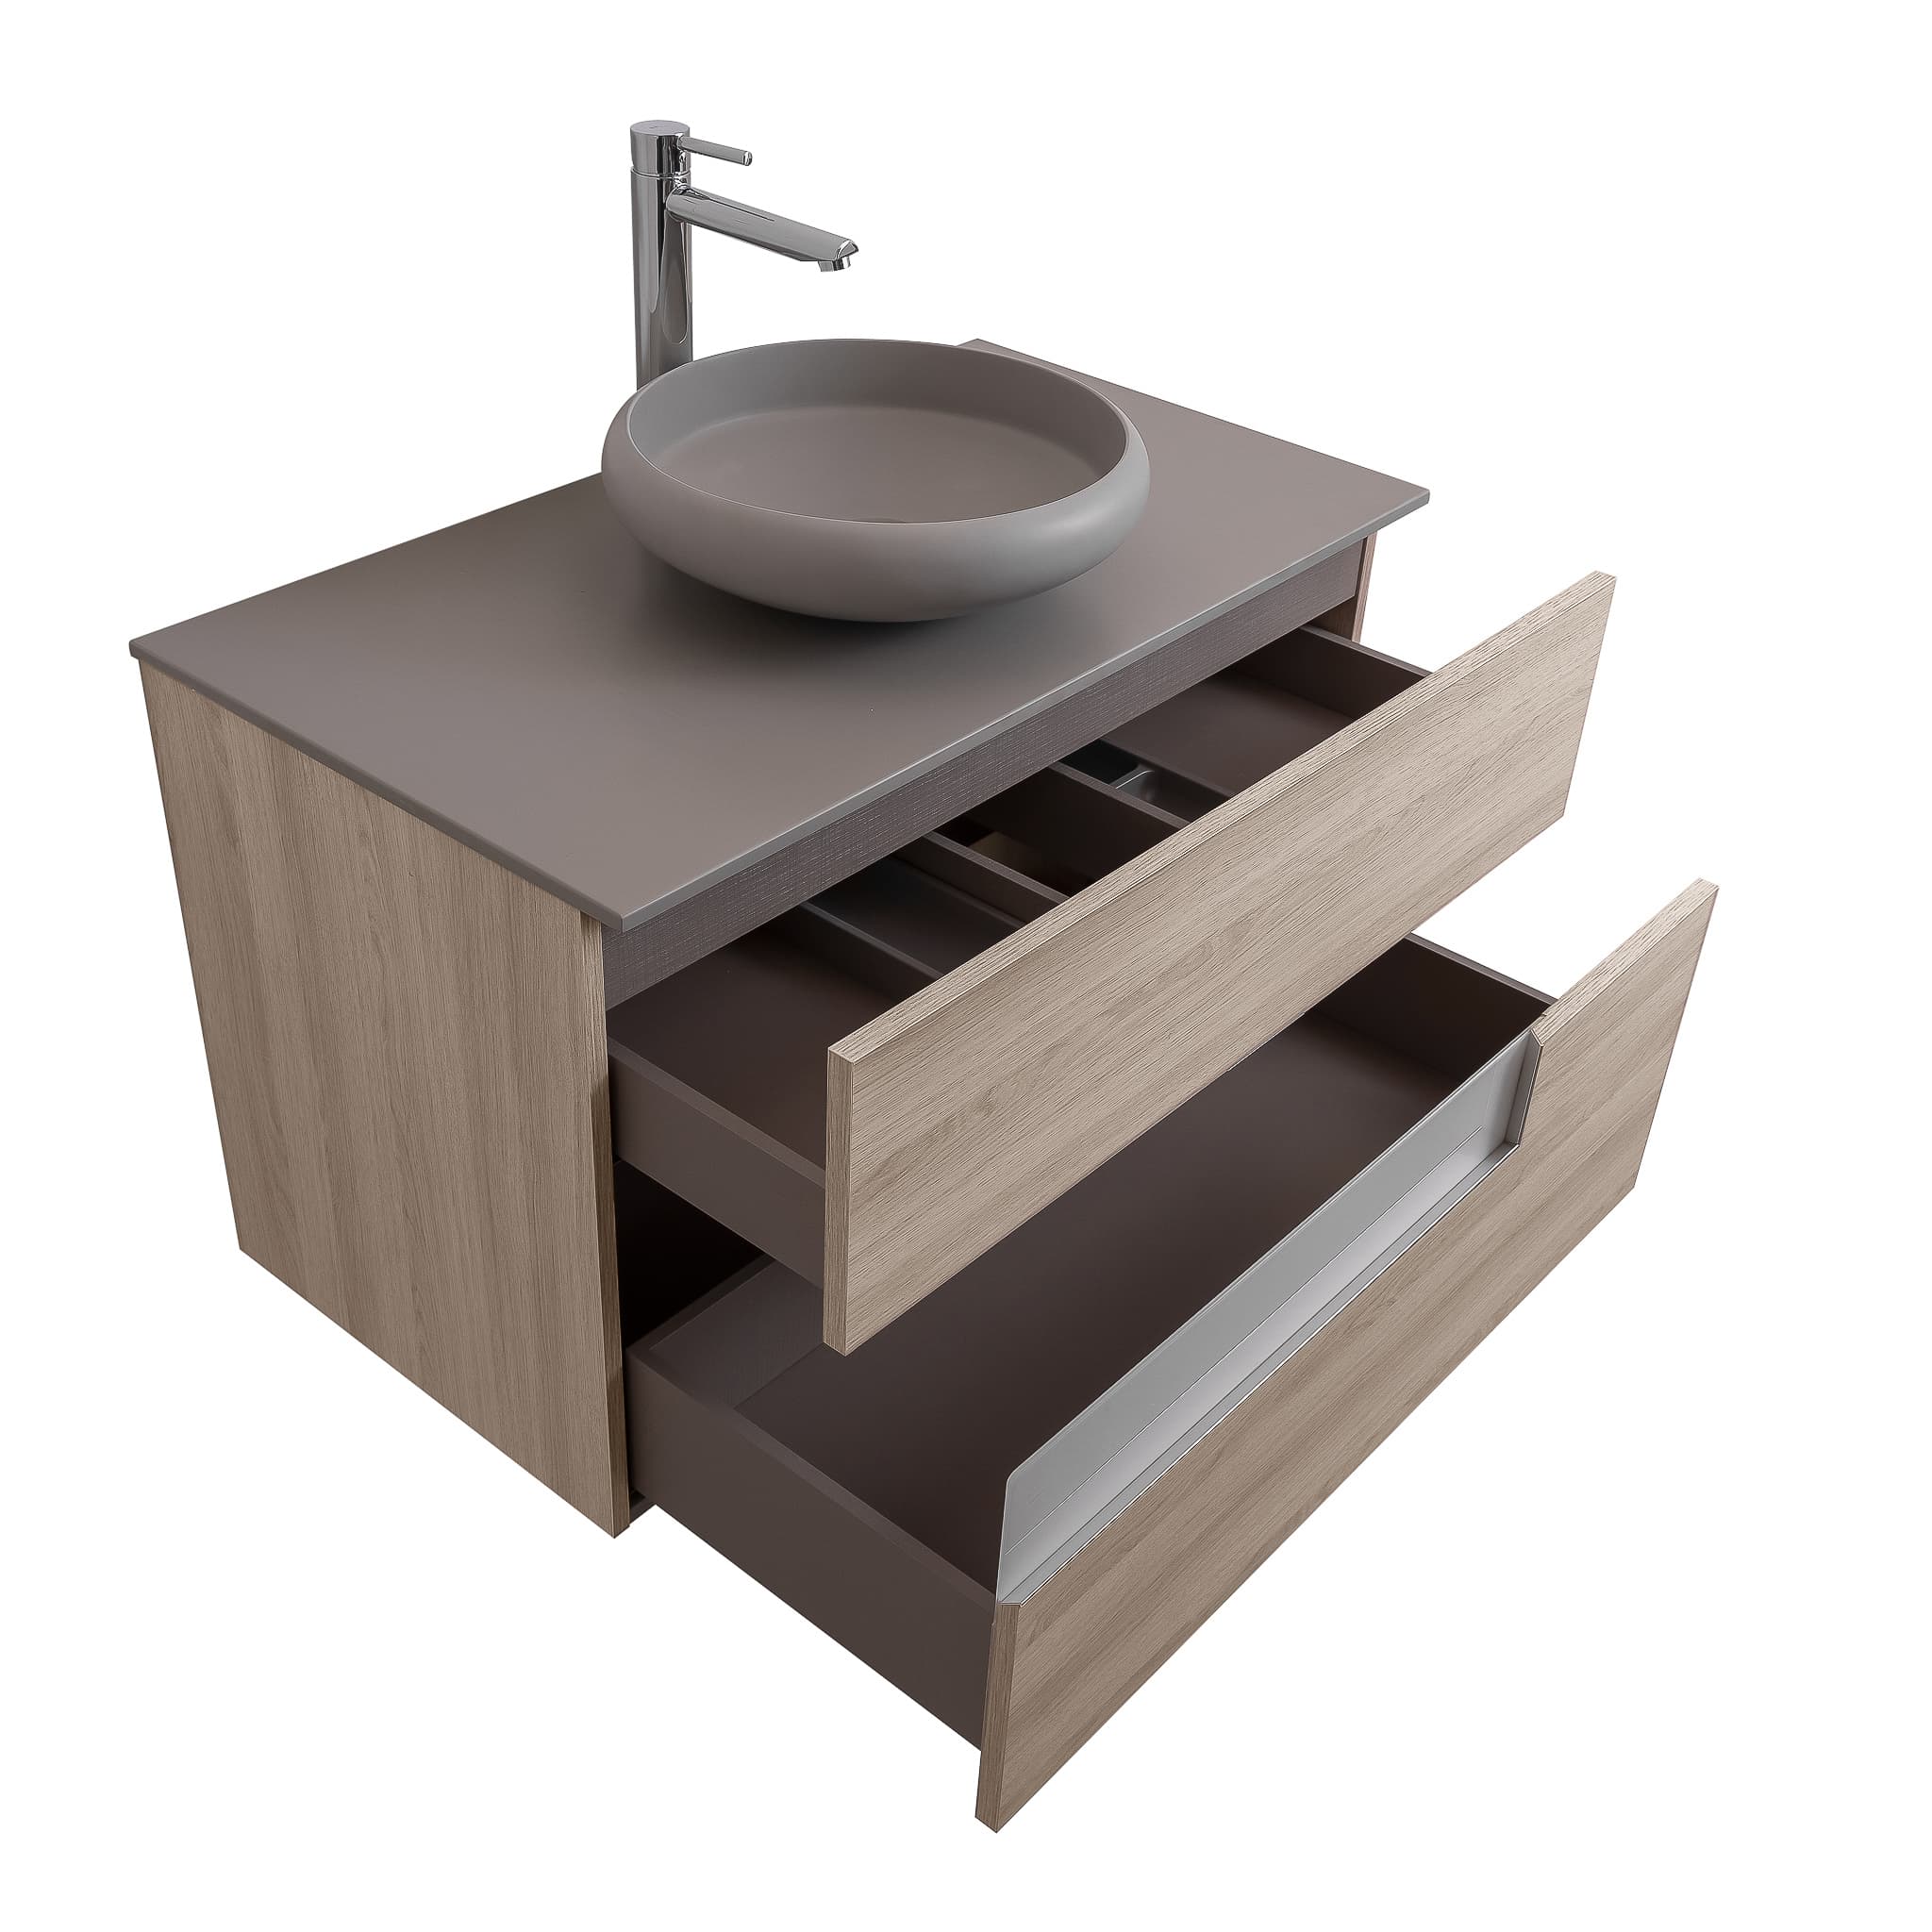 Vision 31.5 Natural Light Wood Cabinet, Solid Surface Flat Grey Counter And Round Solid Surface Grey Basin 1153, Wall Mounted Modern Vanity Set